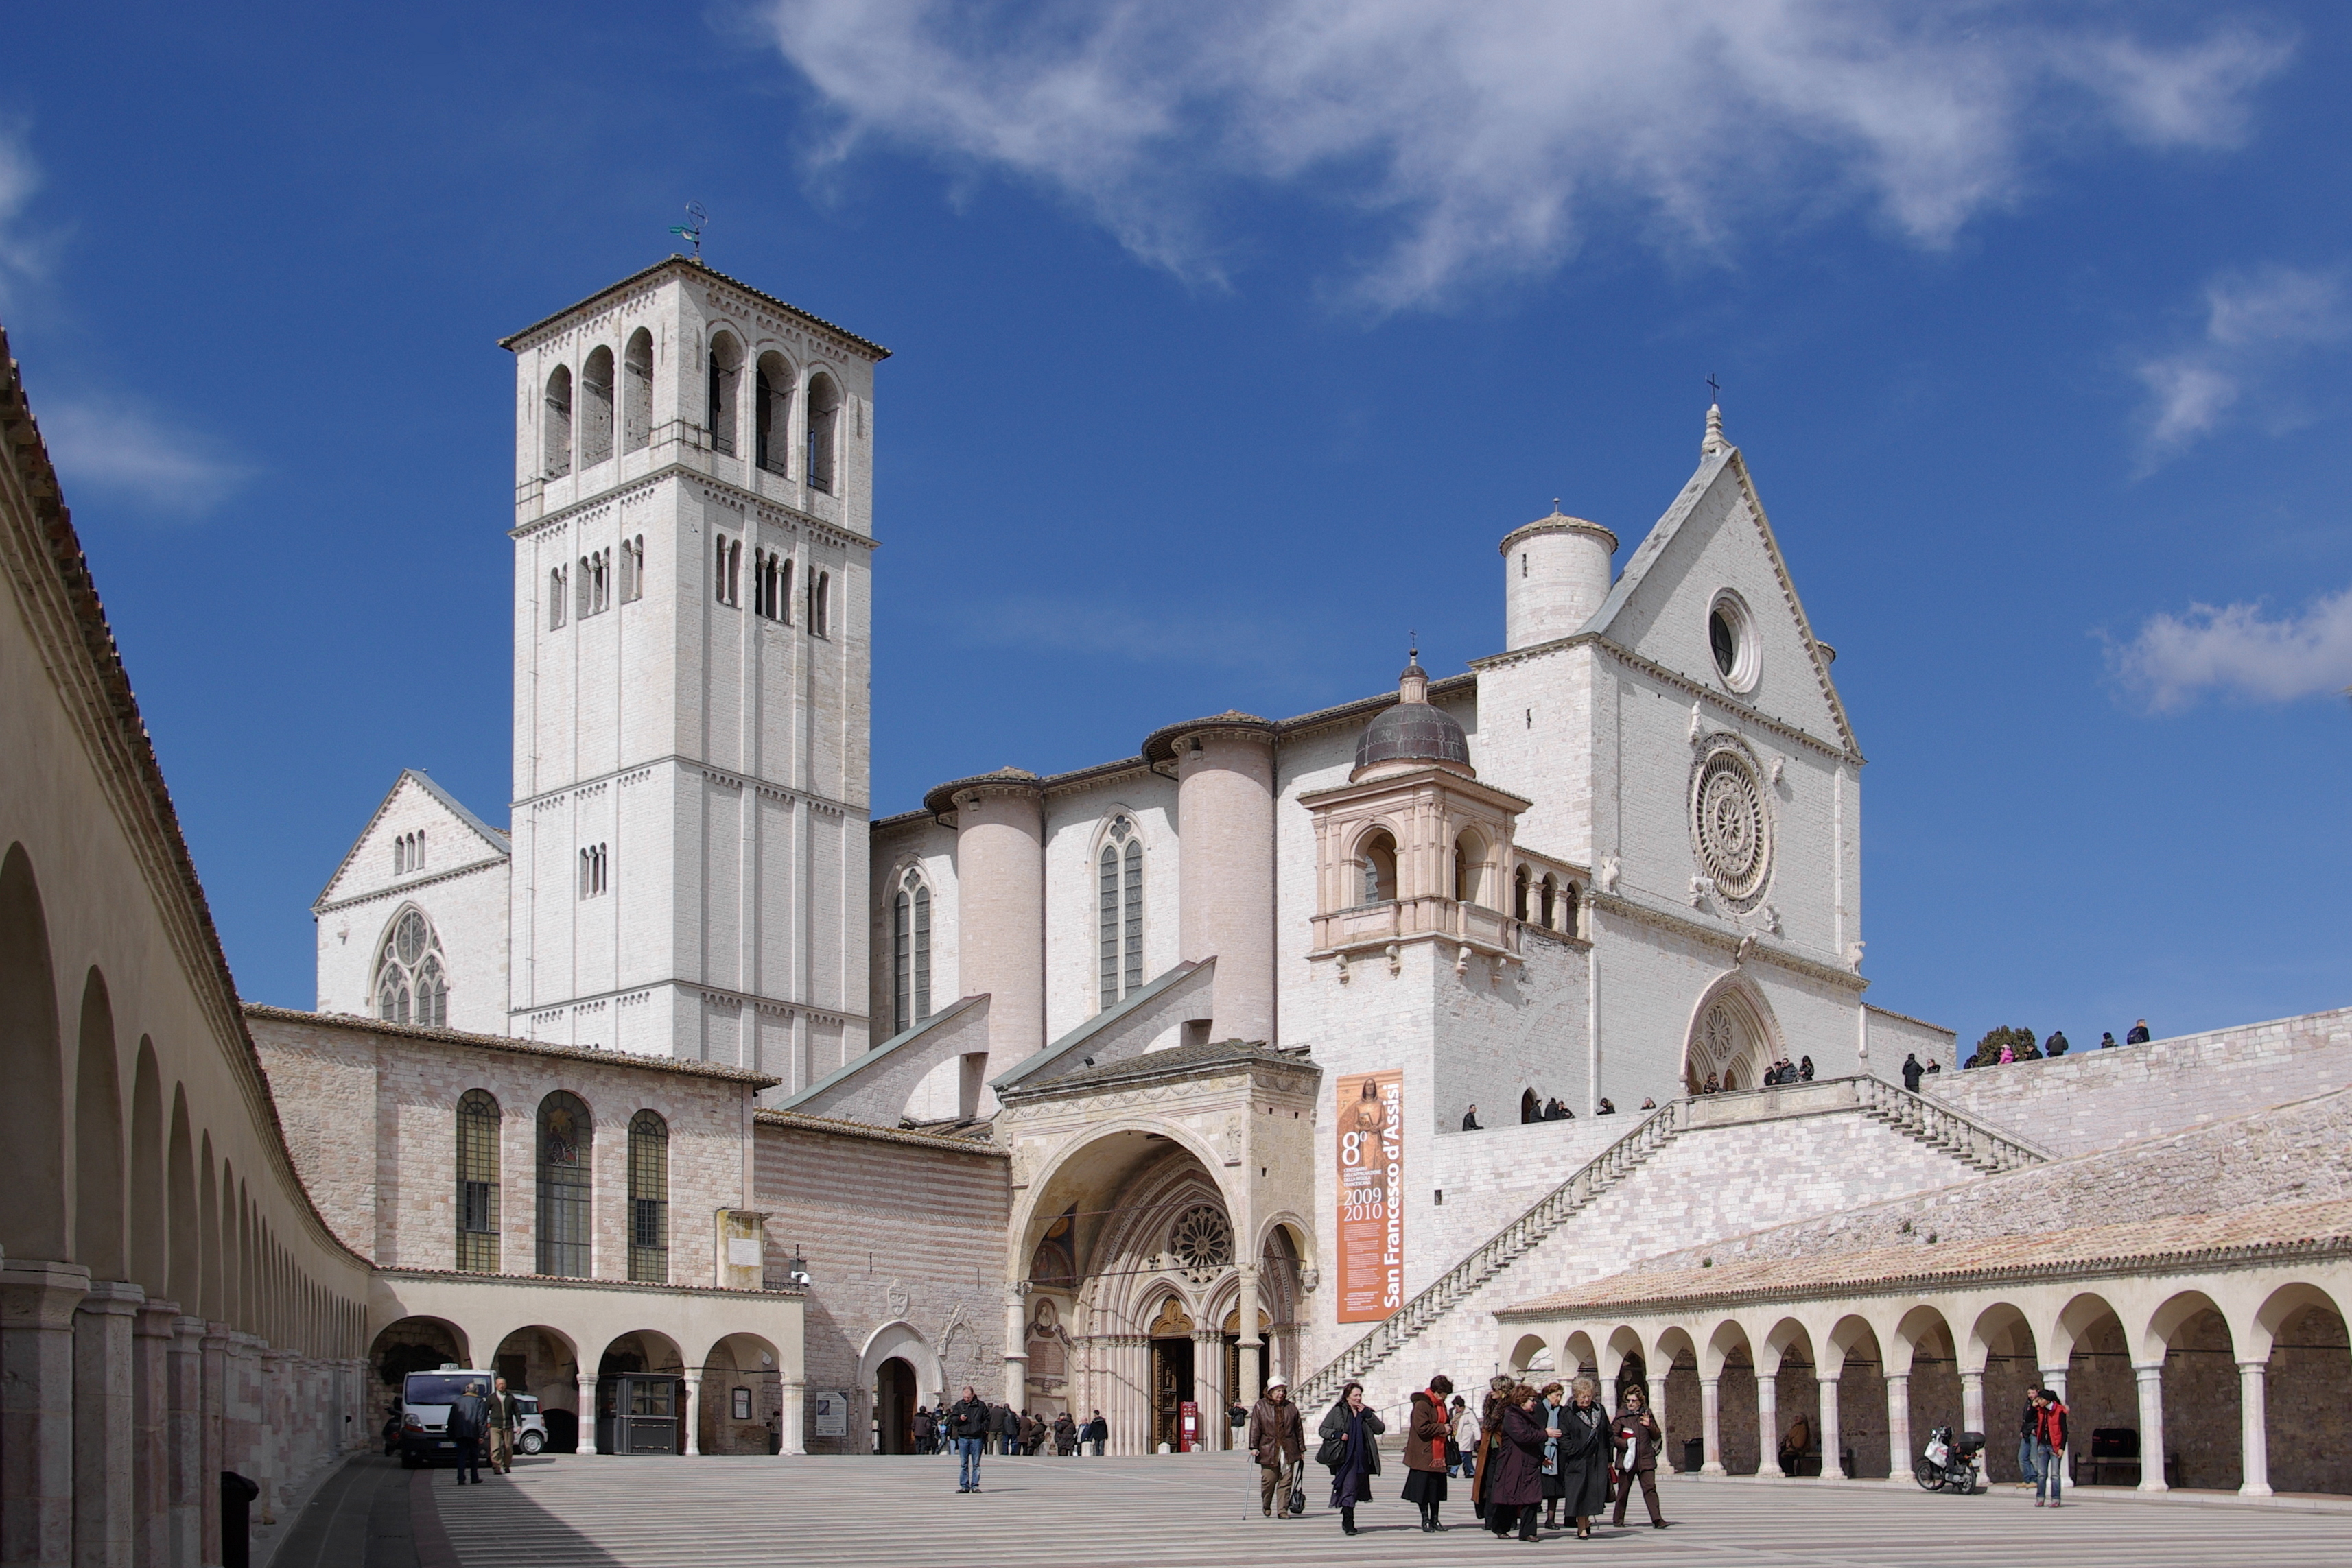 Papal Basilica of St. Francis of Assisi in Umbria, Italy.